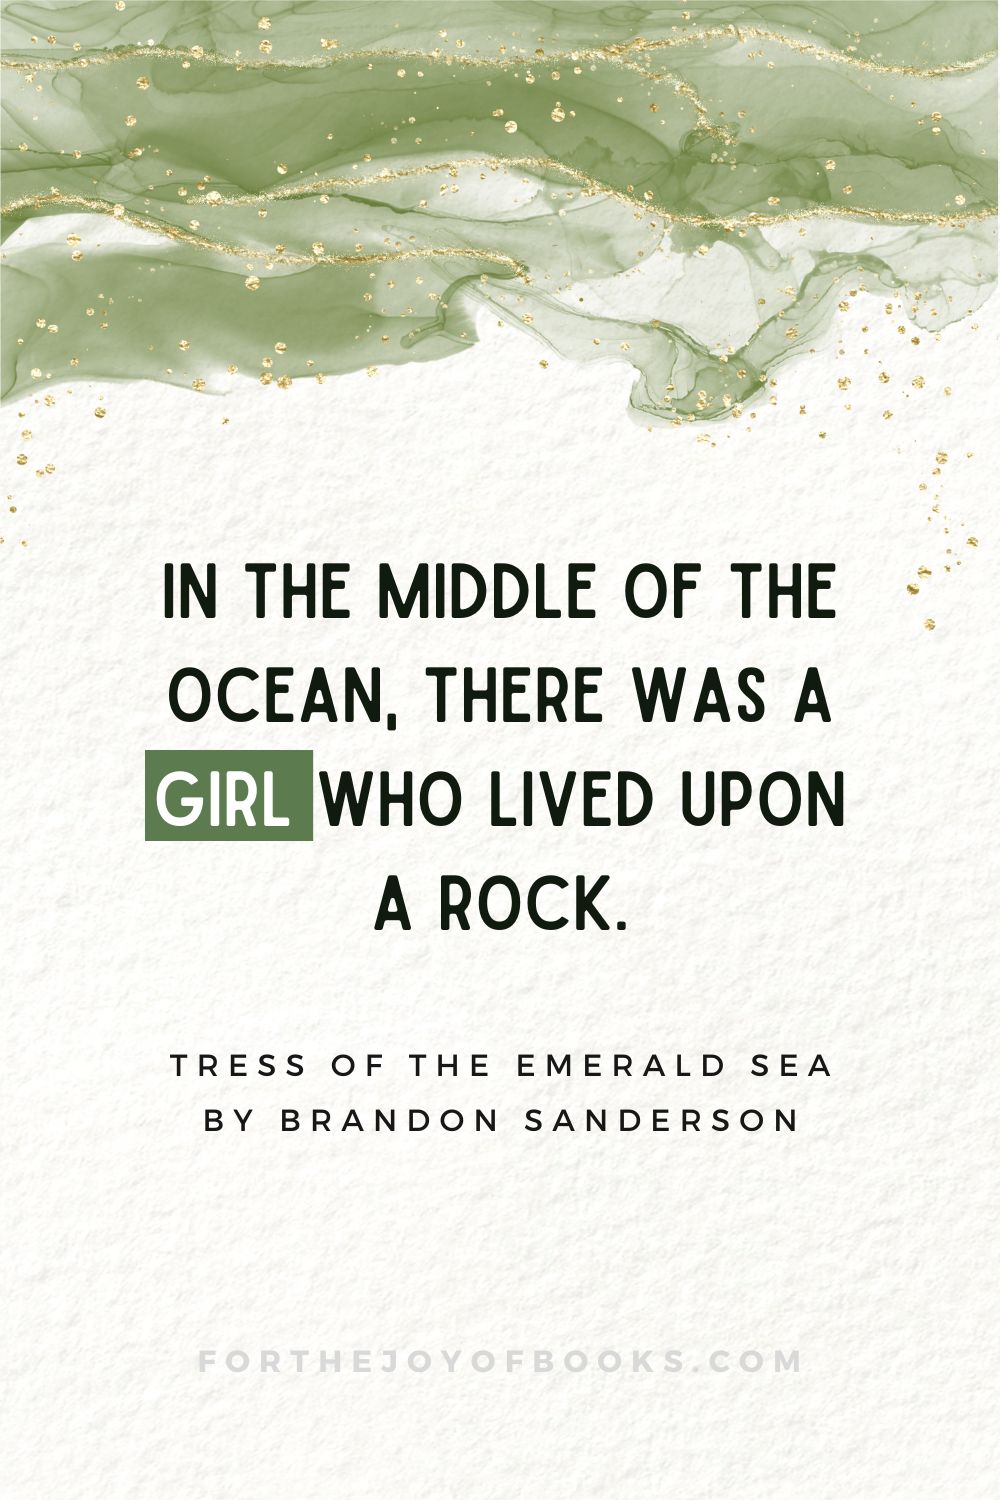 40 Tress of the Emerald Sea Quotes That Will Make You Think and Laugh